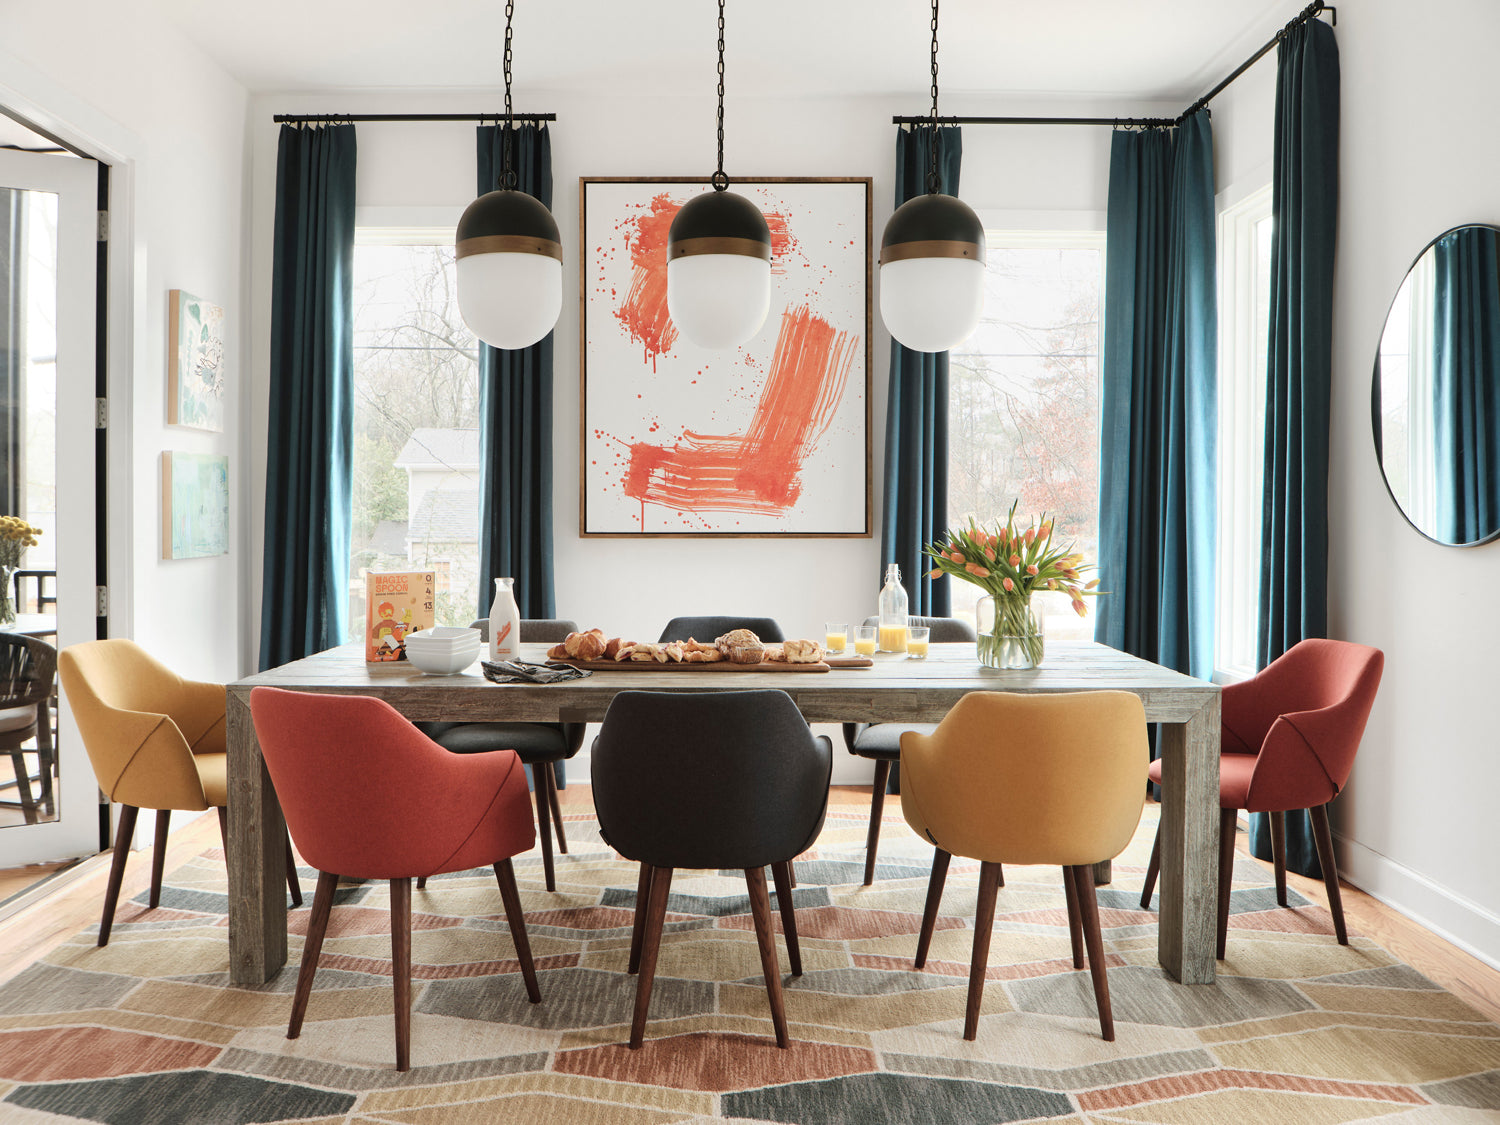 A series of Pendant Lights showcased above a Mid-Century Modern style Dining Room.